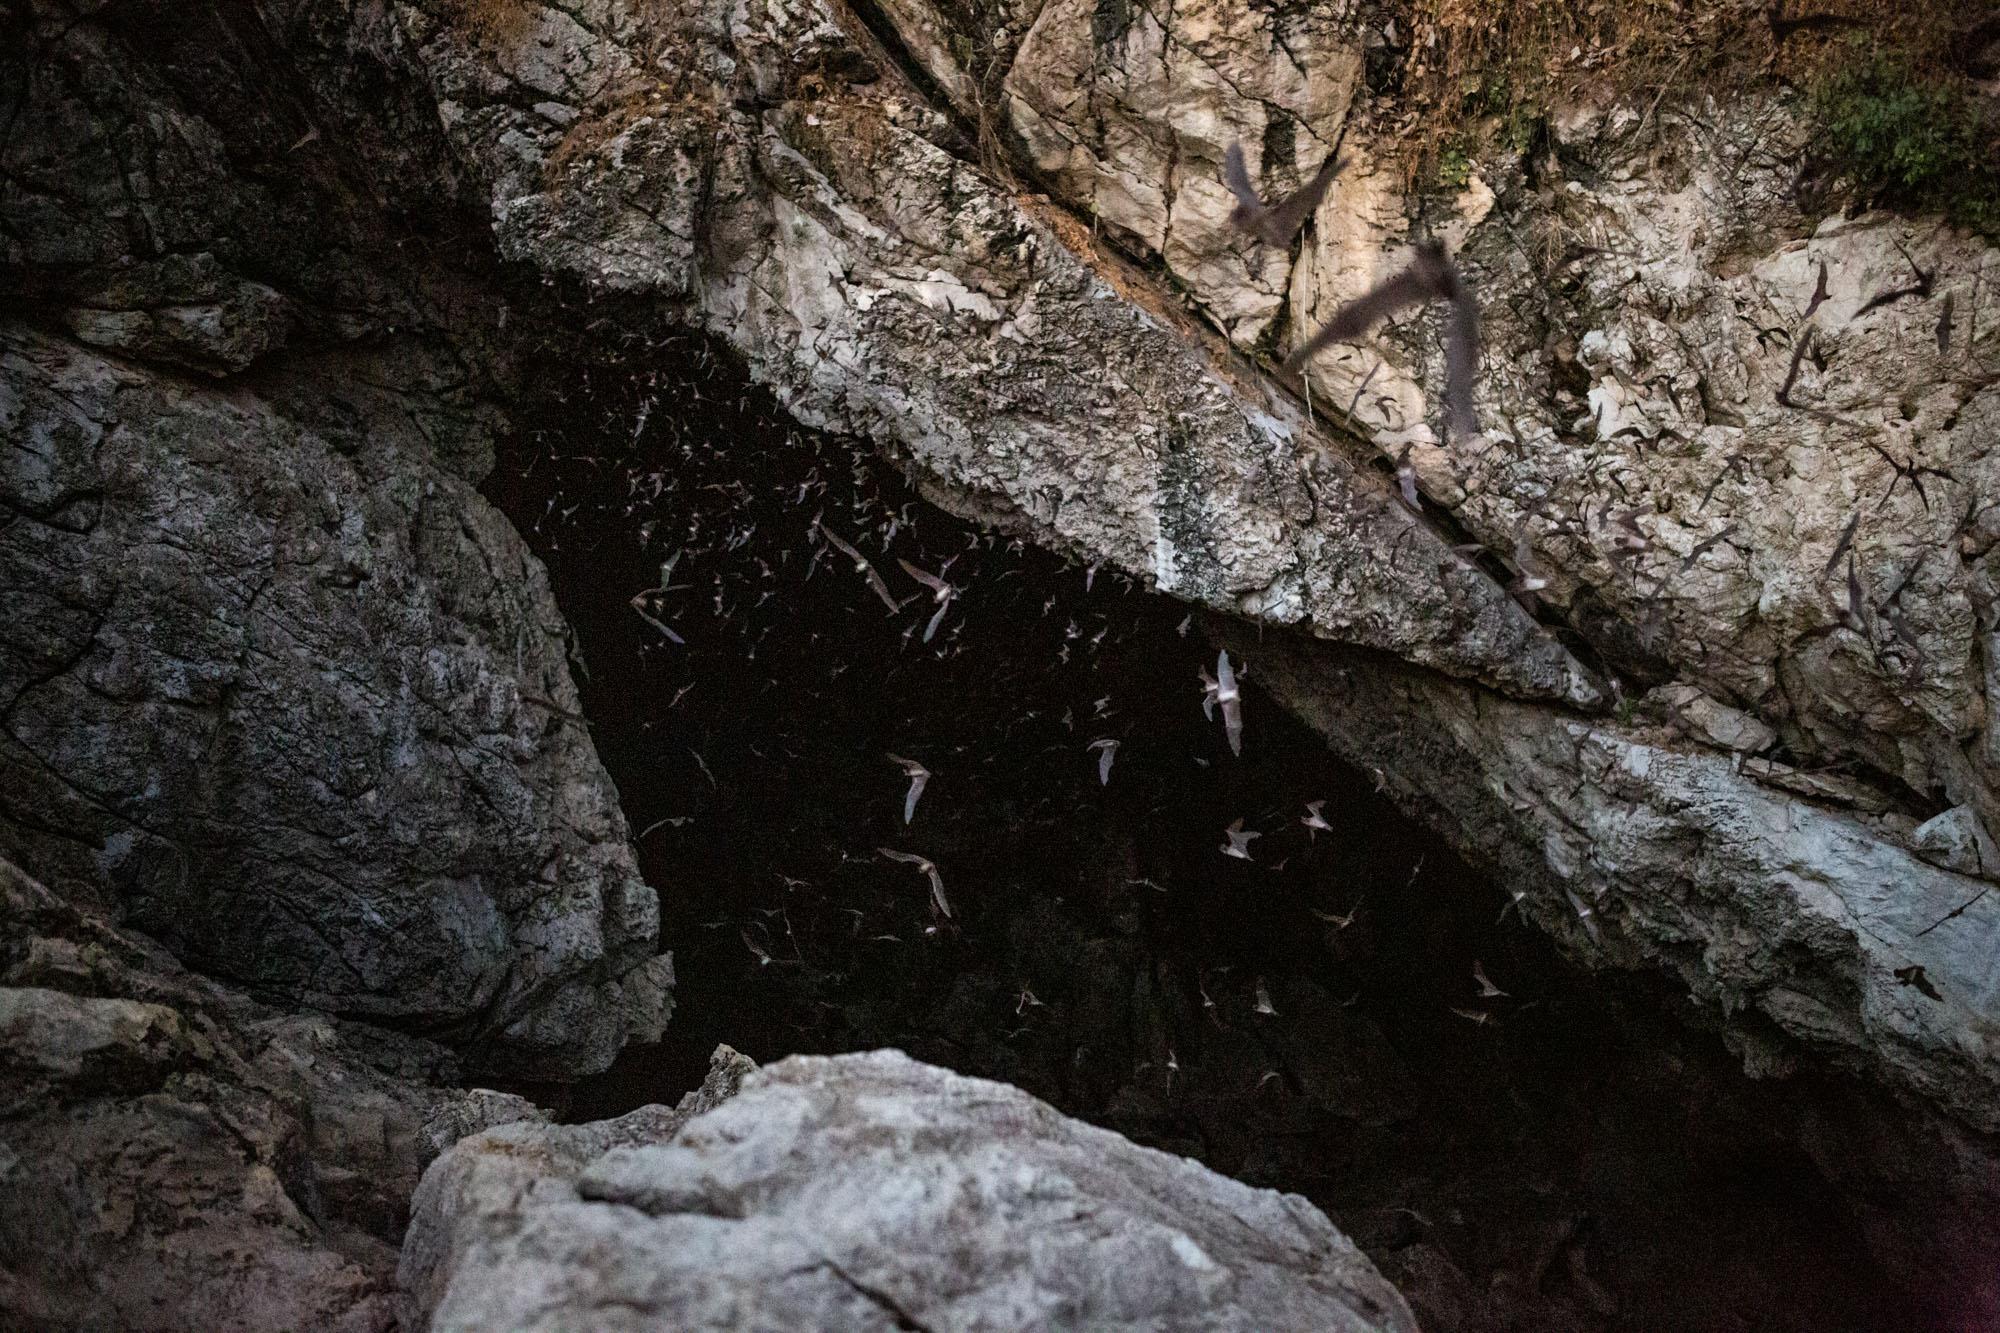 Bats stream out of a crevice to feed at dusk at the Khao Chong Pran Cave in Ratchaburi, Thailand, December 2020.